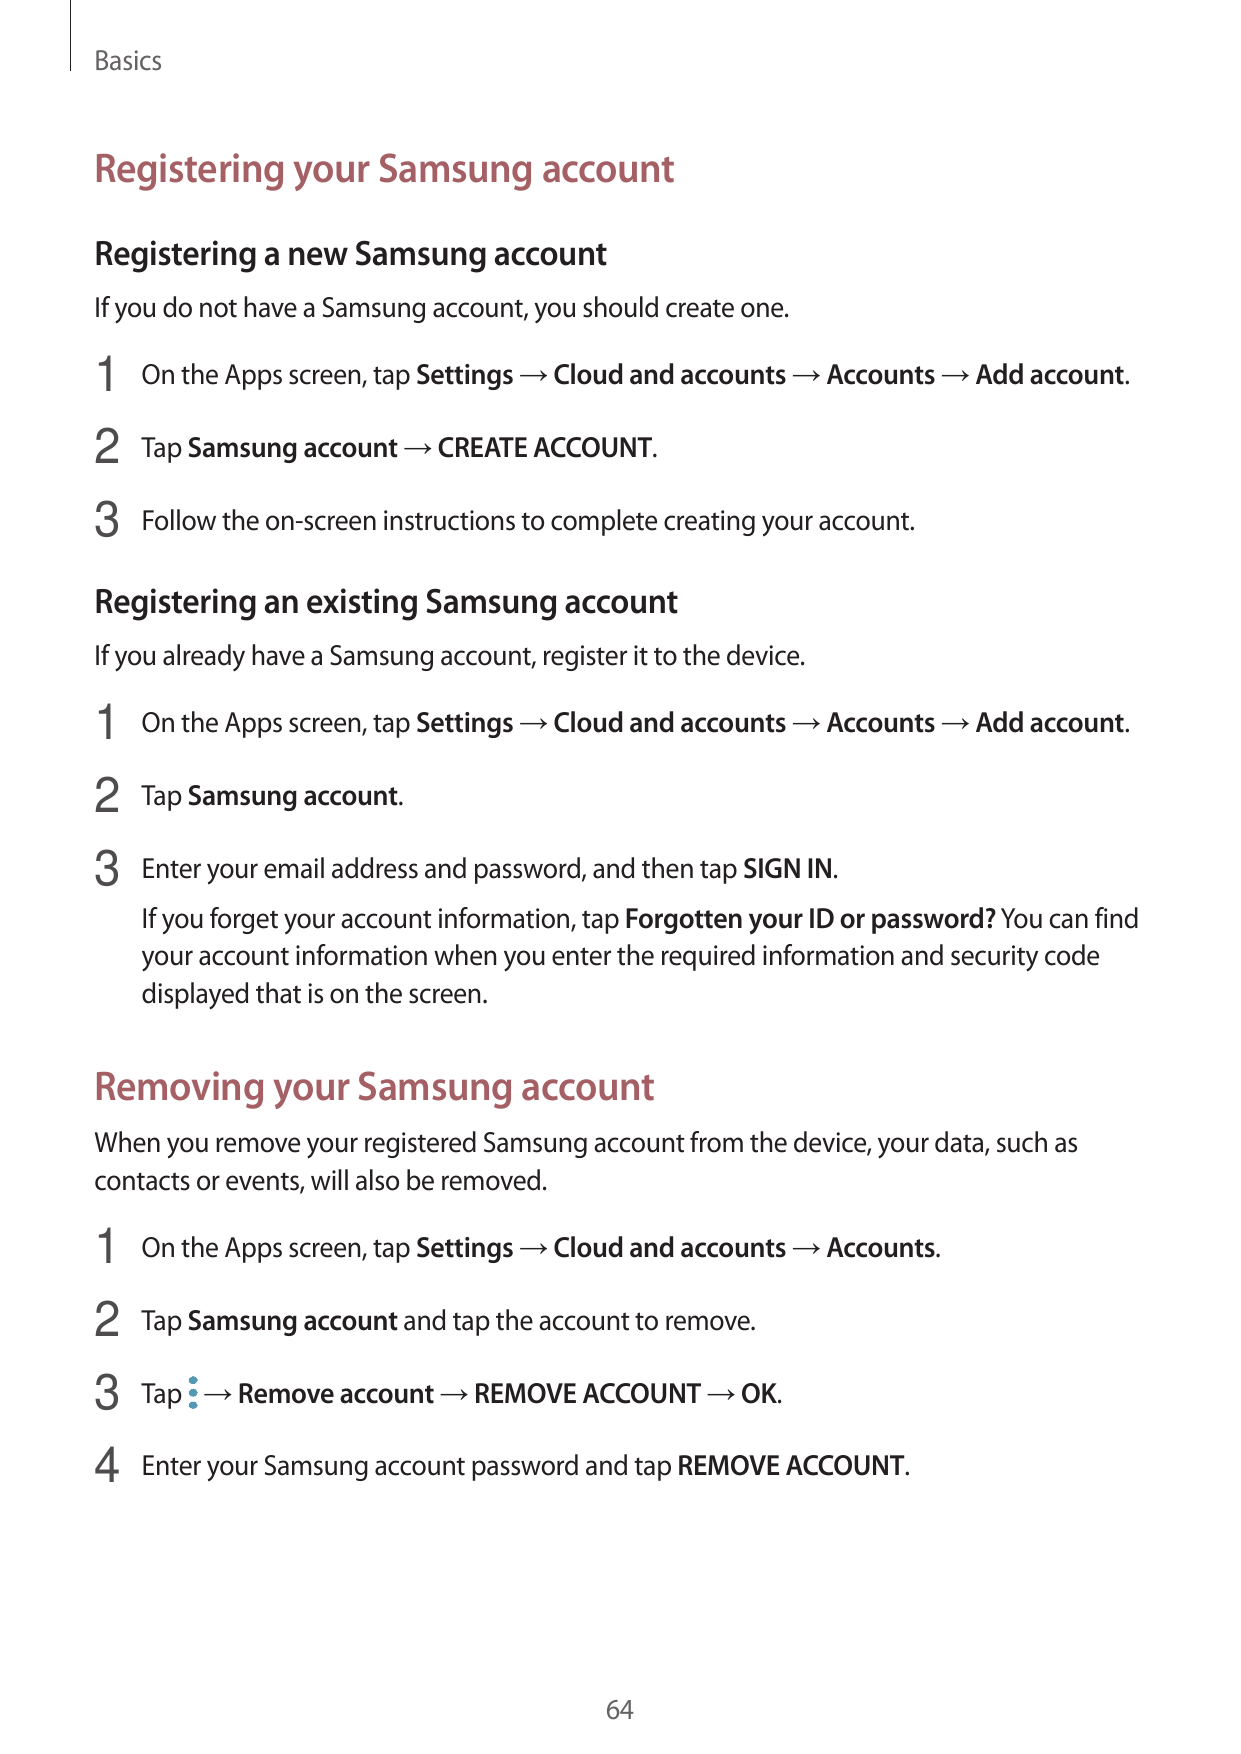 BasicsRegistering your Samsung accountRegistering a new Samsung accountIf you do not have a Samsung account, you should create o